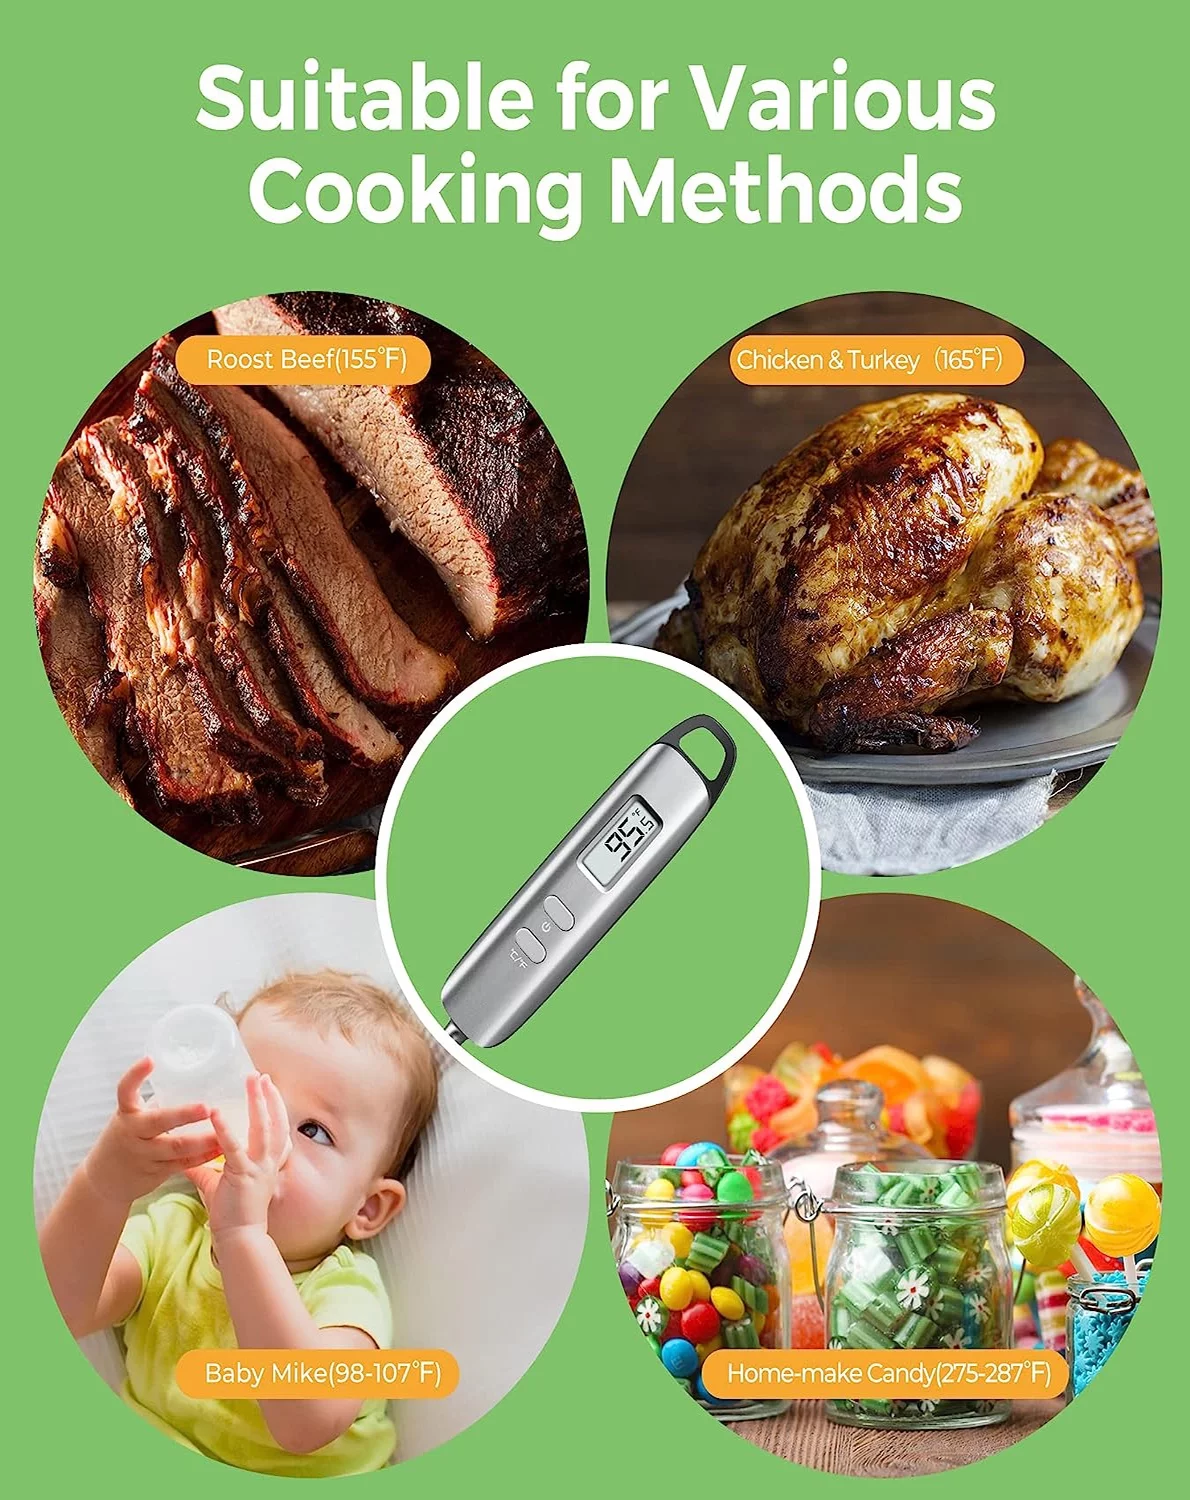 Can You Use A Meat Thermometer For Oil? - Kitchen Habit